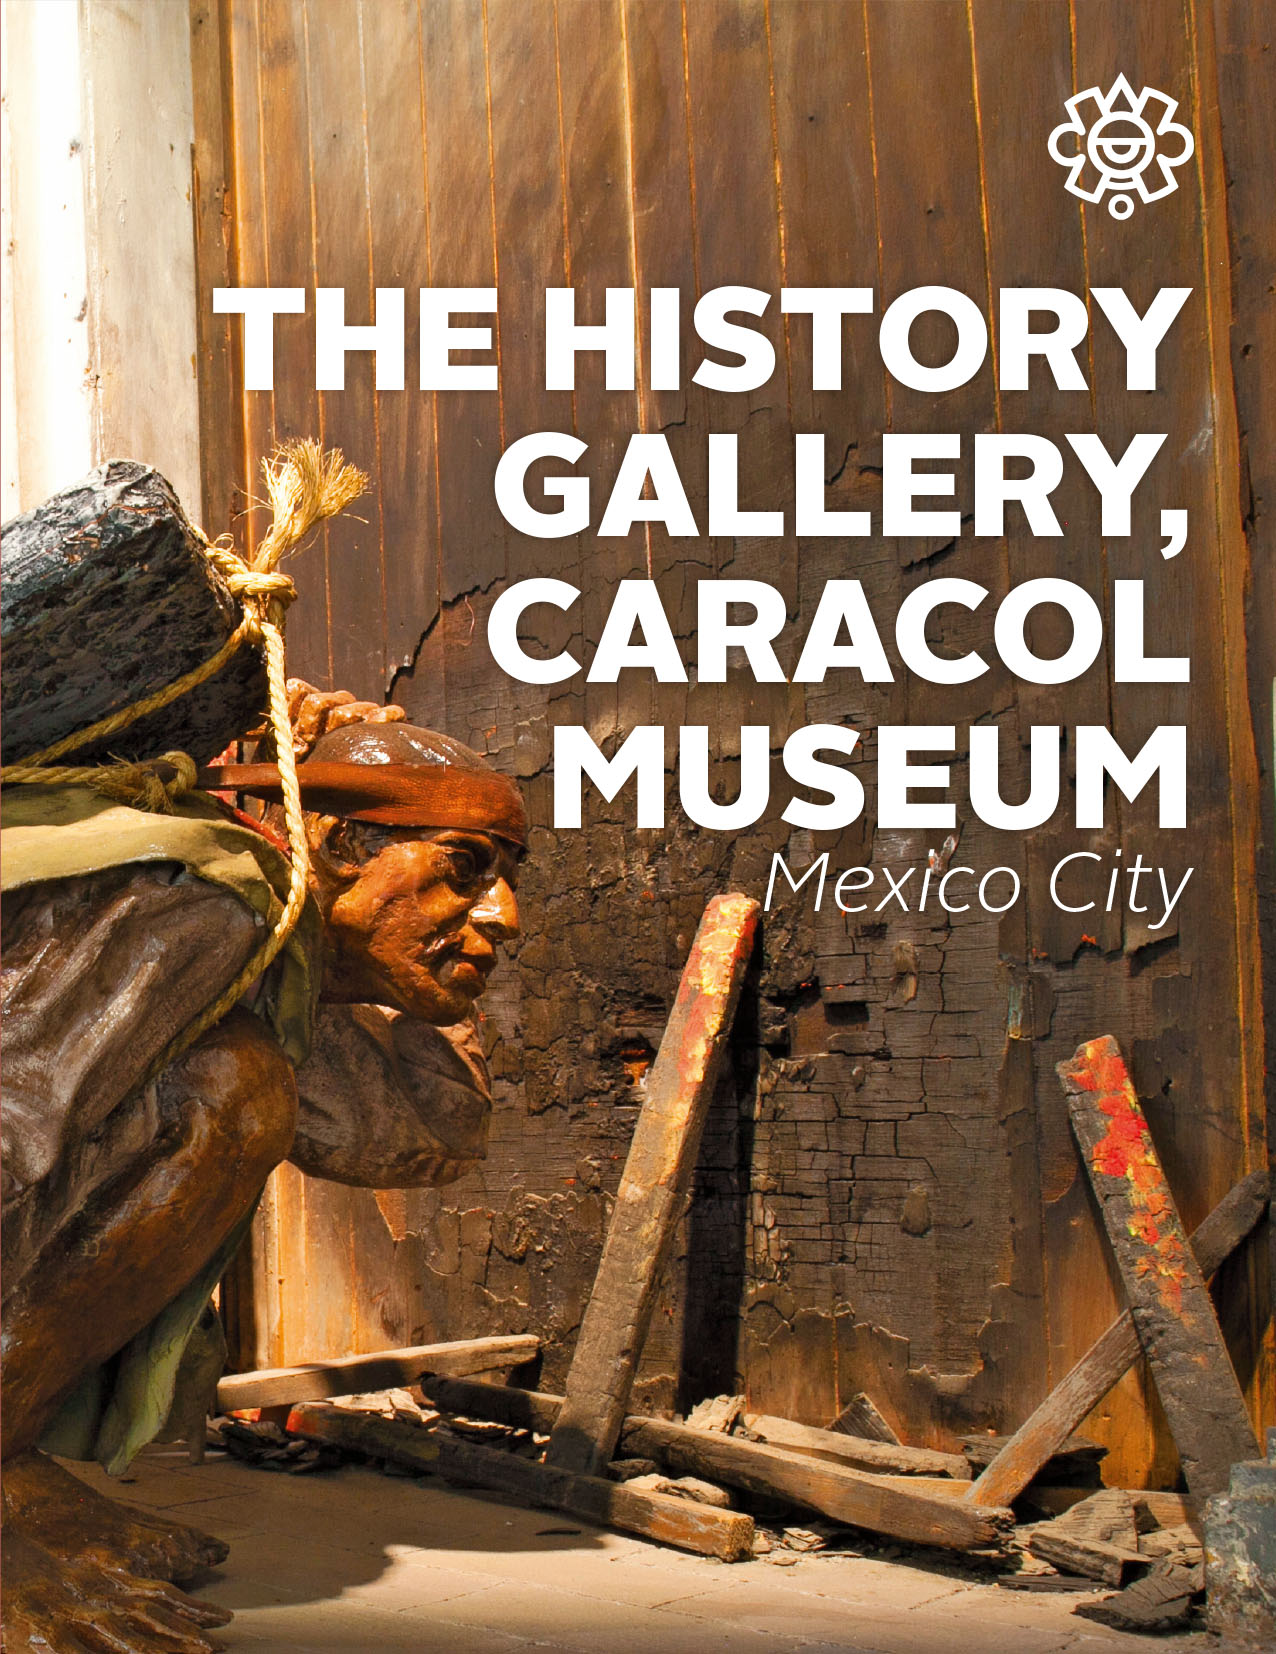 The History Gallery, Caracol Museum